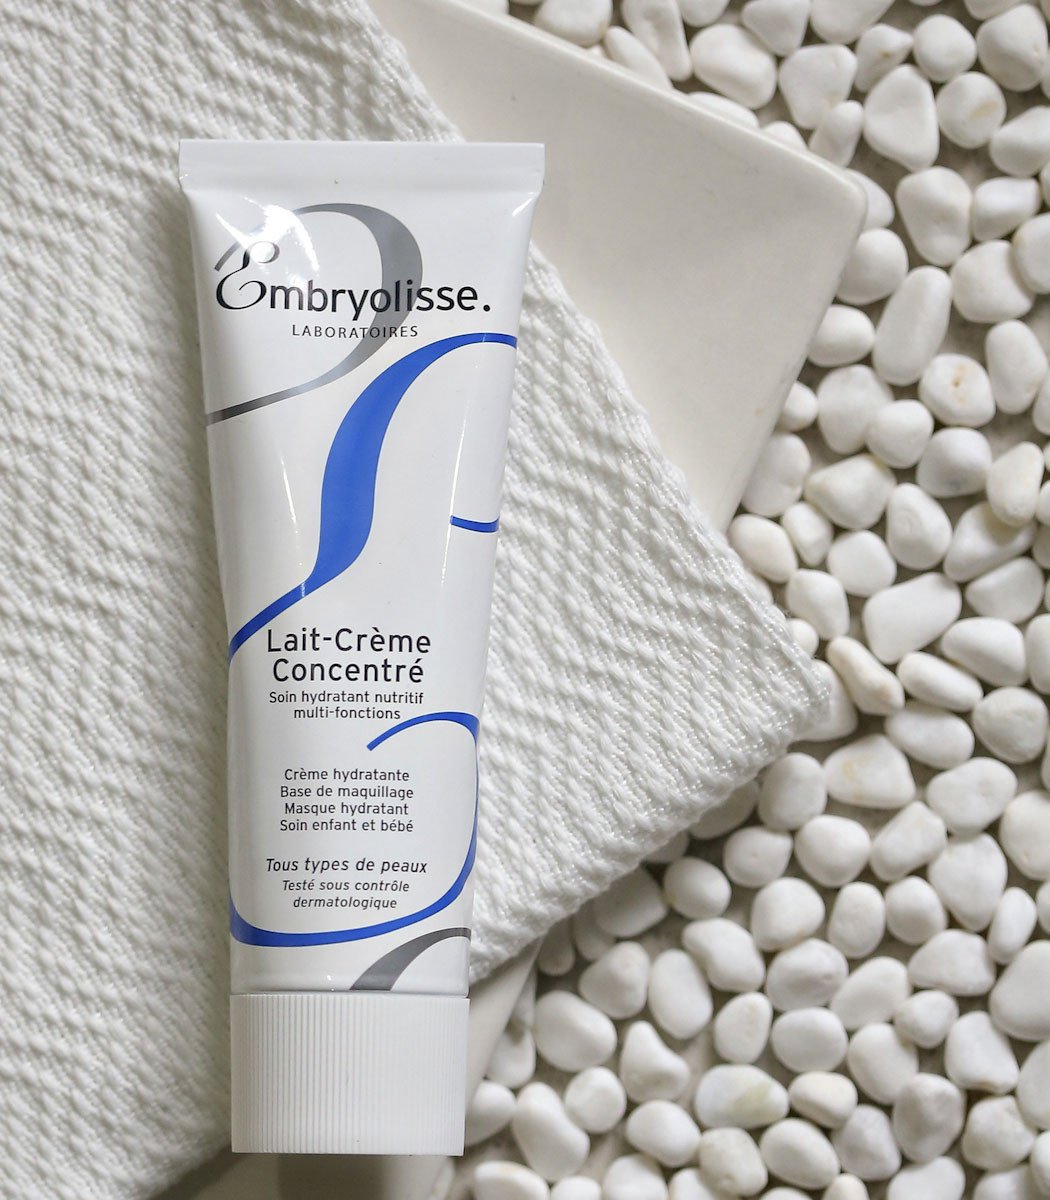 skincare-embryolisse-lait-creme-concentrate-24-hour-miracle-cream-75ml-1_317cb38c-ba90-4d34-8475-f5c799767f24.jpg